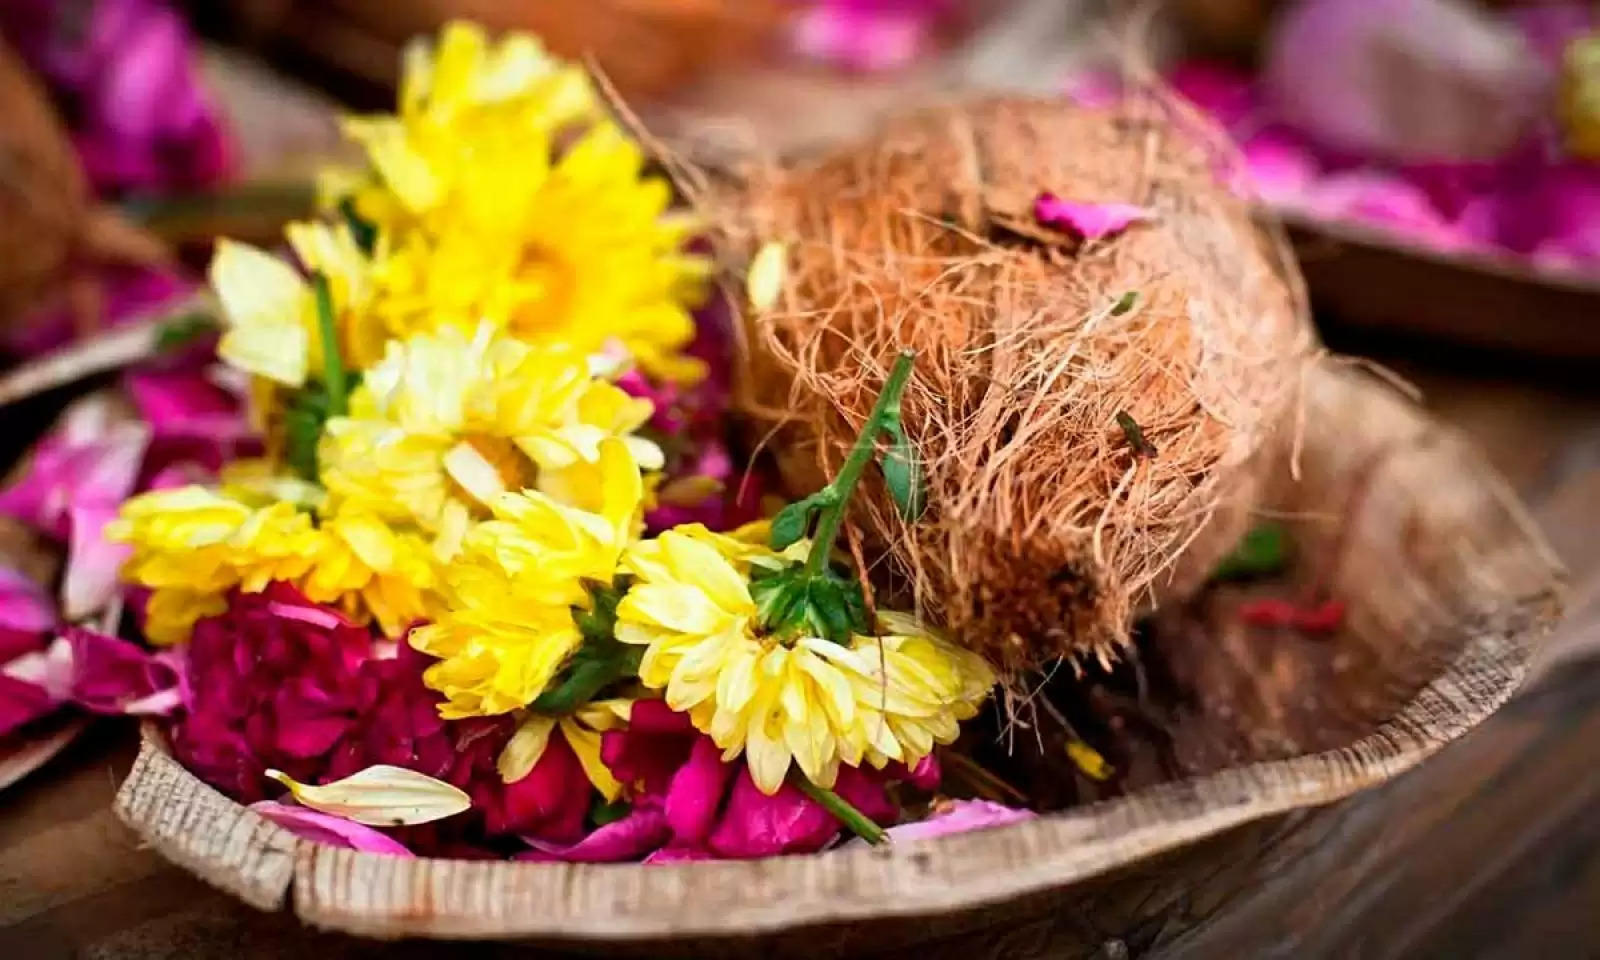  Money totke do this coconut remedies on dussehra to become rich